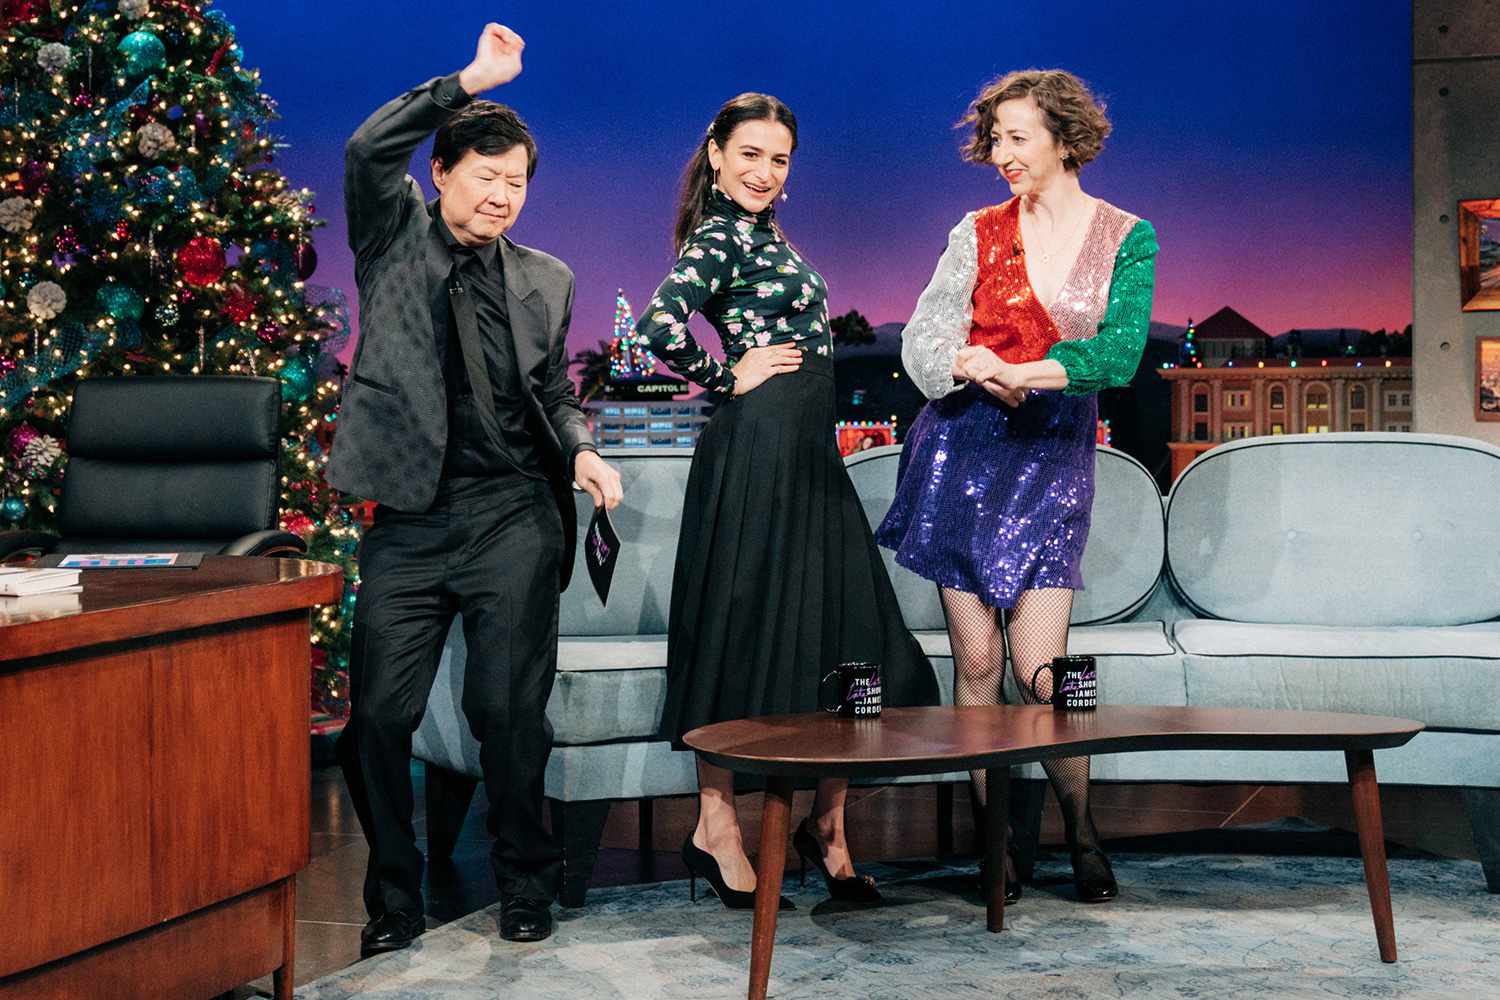 Ken Jeong guest-hosts The Late Late Show with James Corden airing Tuesday, December 17, 2019, with guests Jenny Slate, Kristen Schaal, and Rick Schwartz